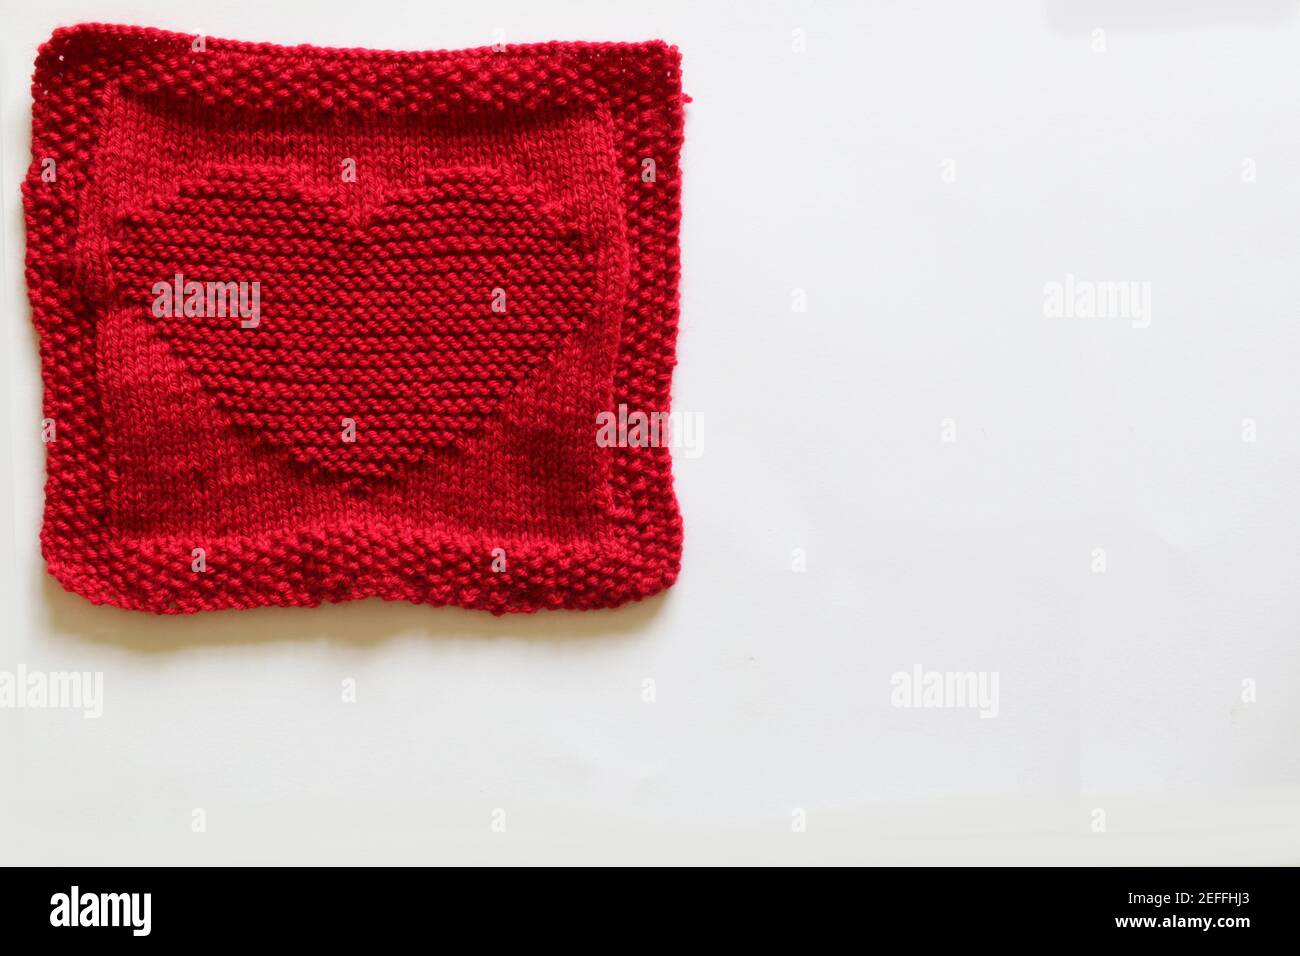 Red knitted square with a heart motif Stock Photo